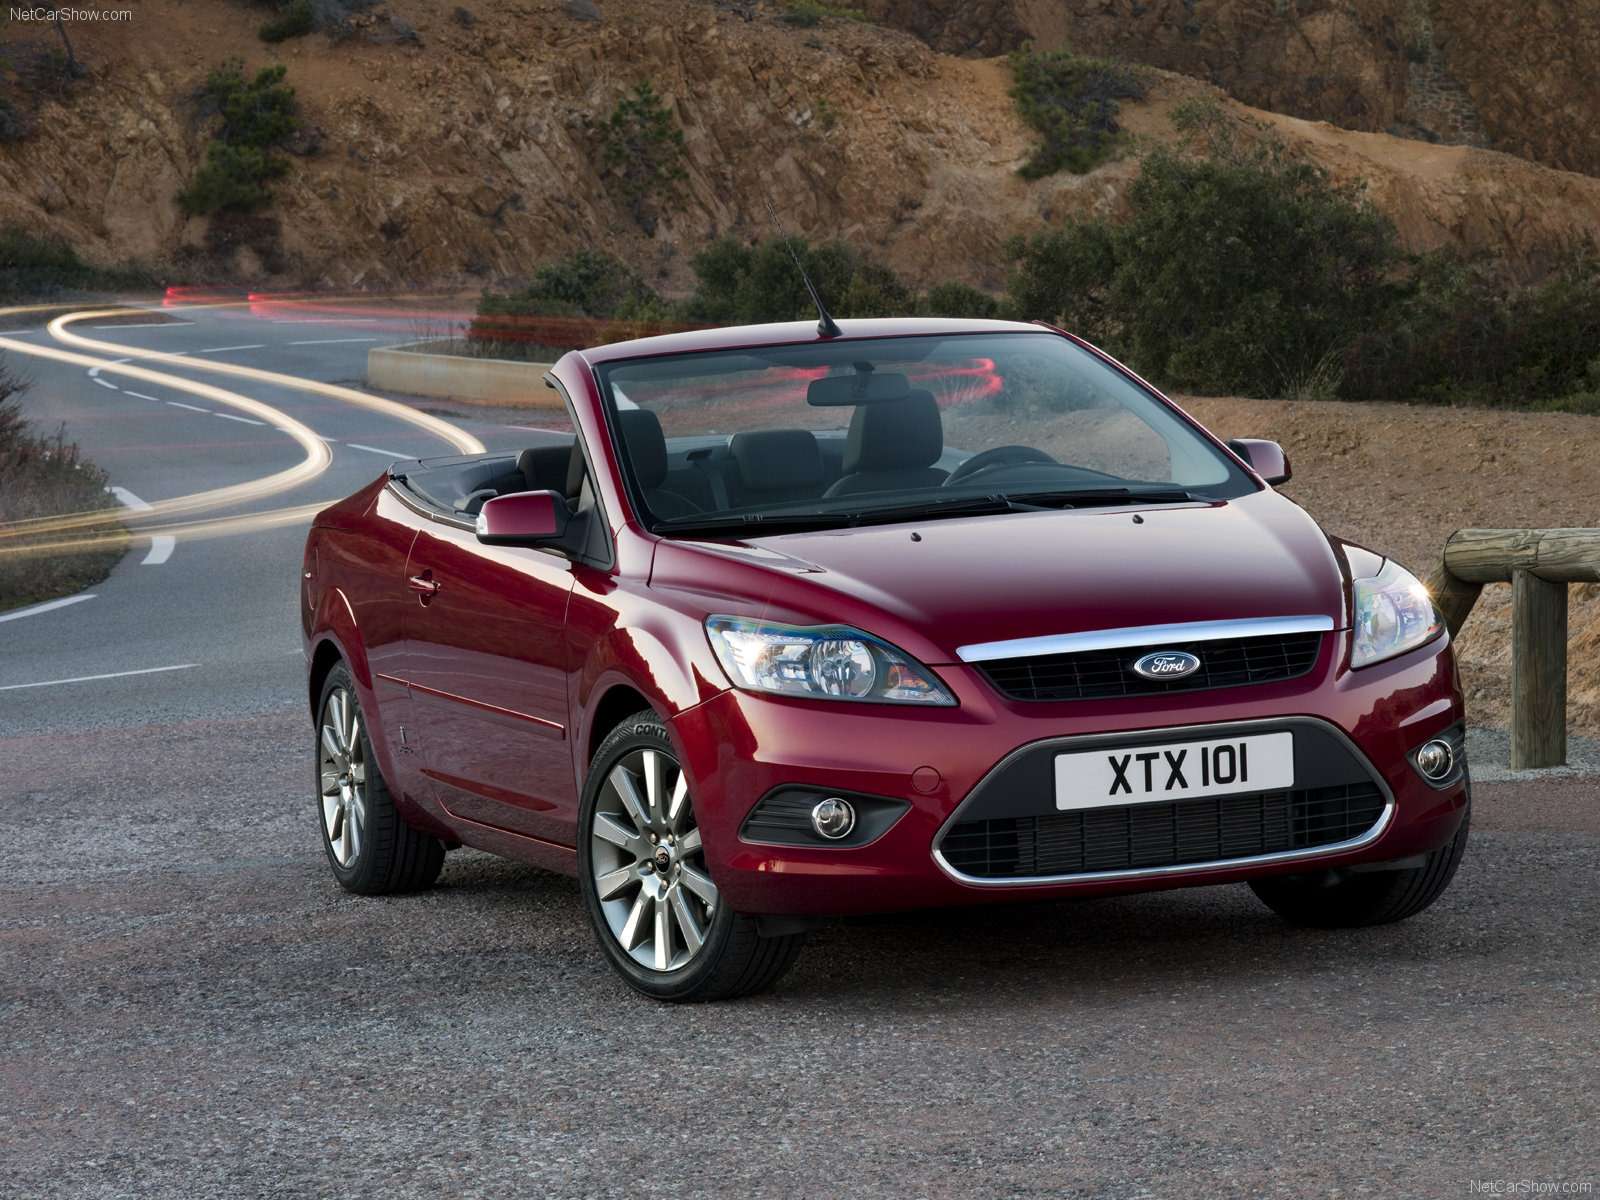 Ford-Focus_Coupe-Cabriolet_2008_1600x1200_wallpaper_02